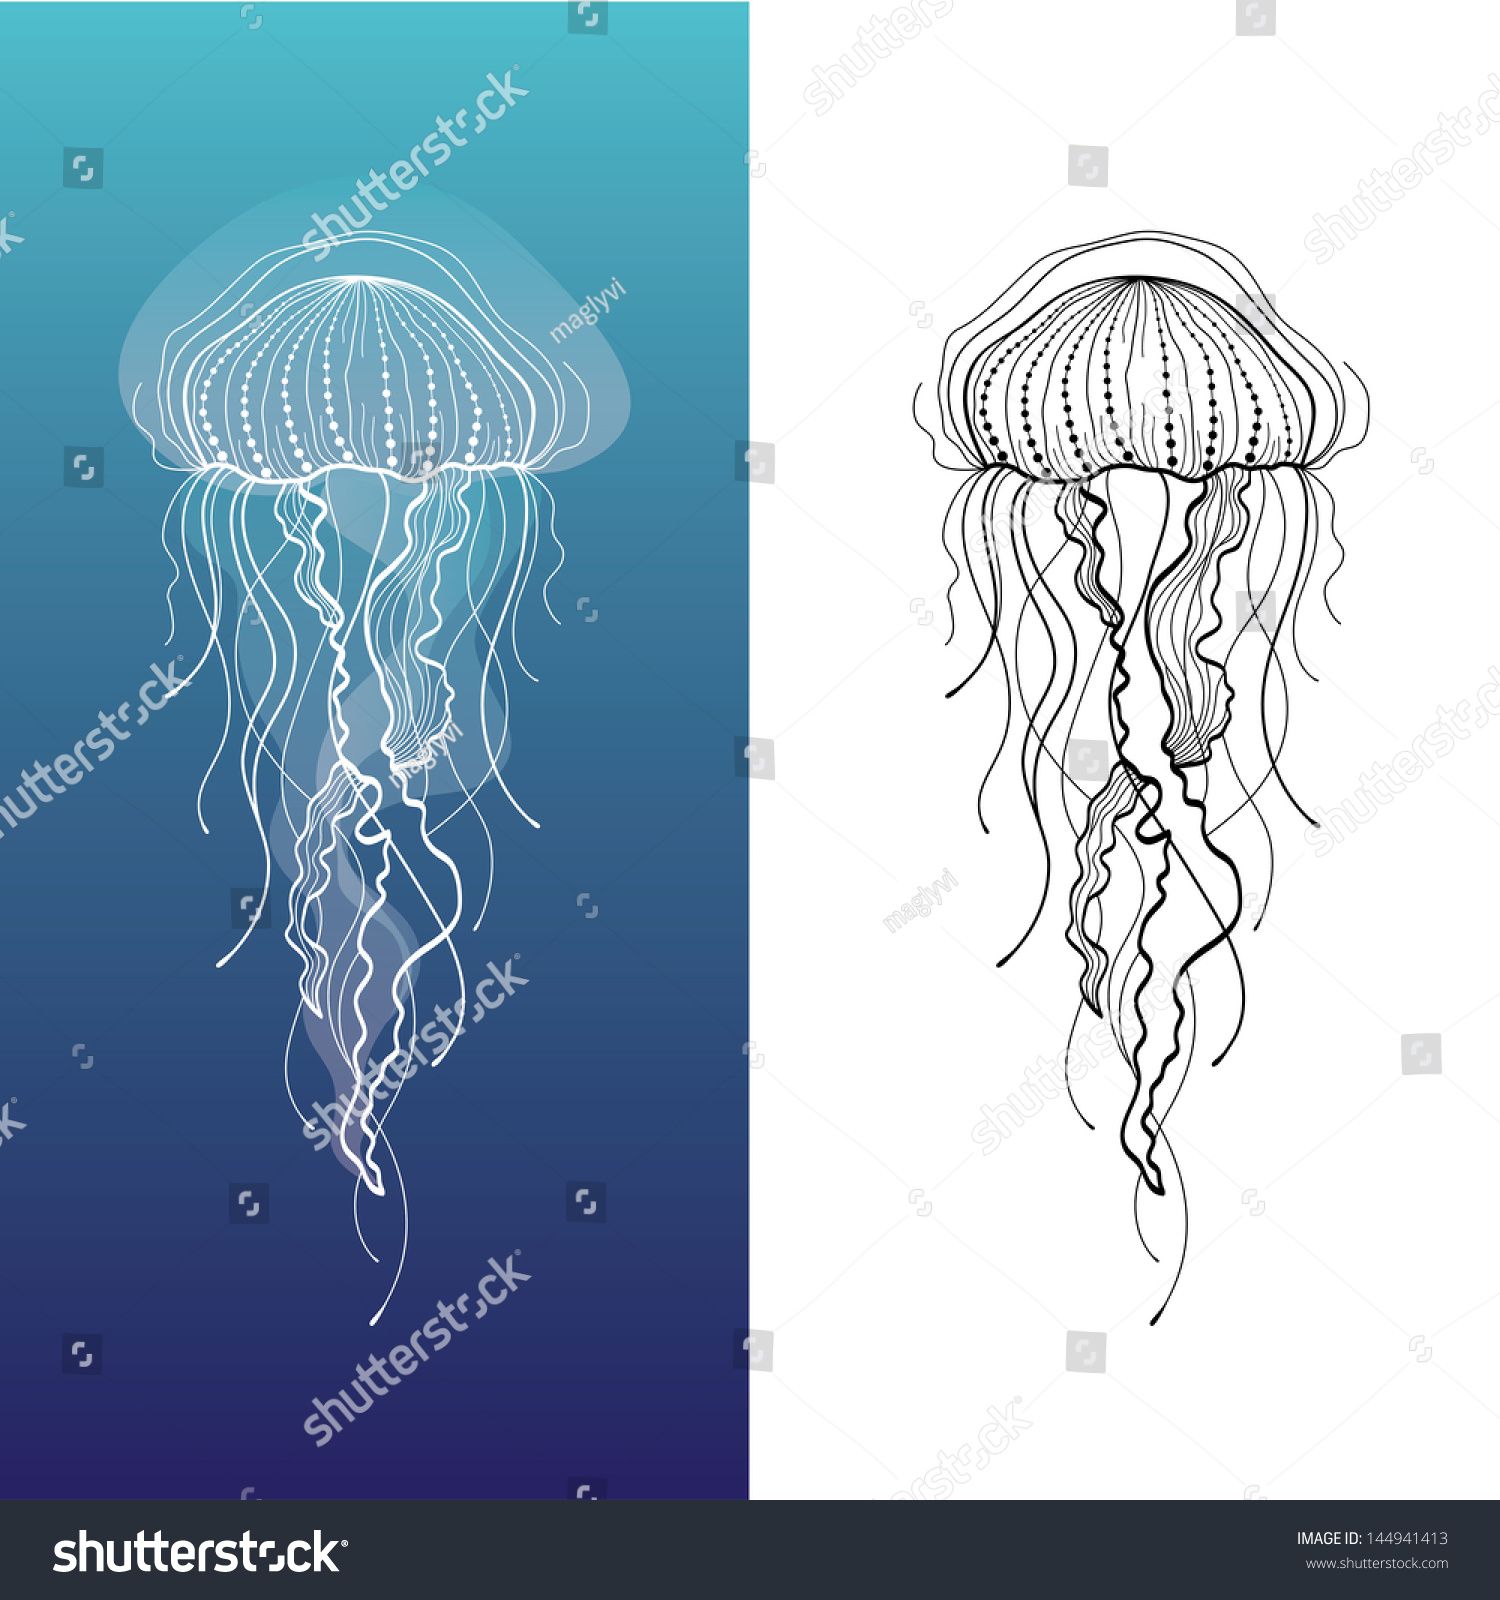 Abstract graphic illustration of jellyfish in vector | Tattoos of ...